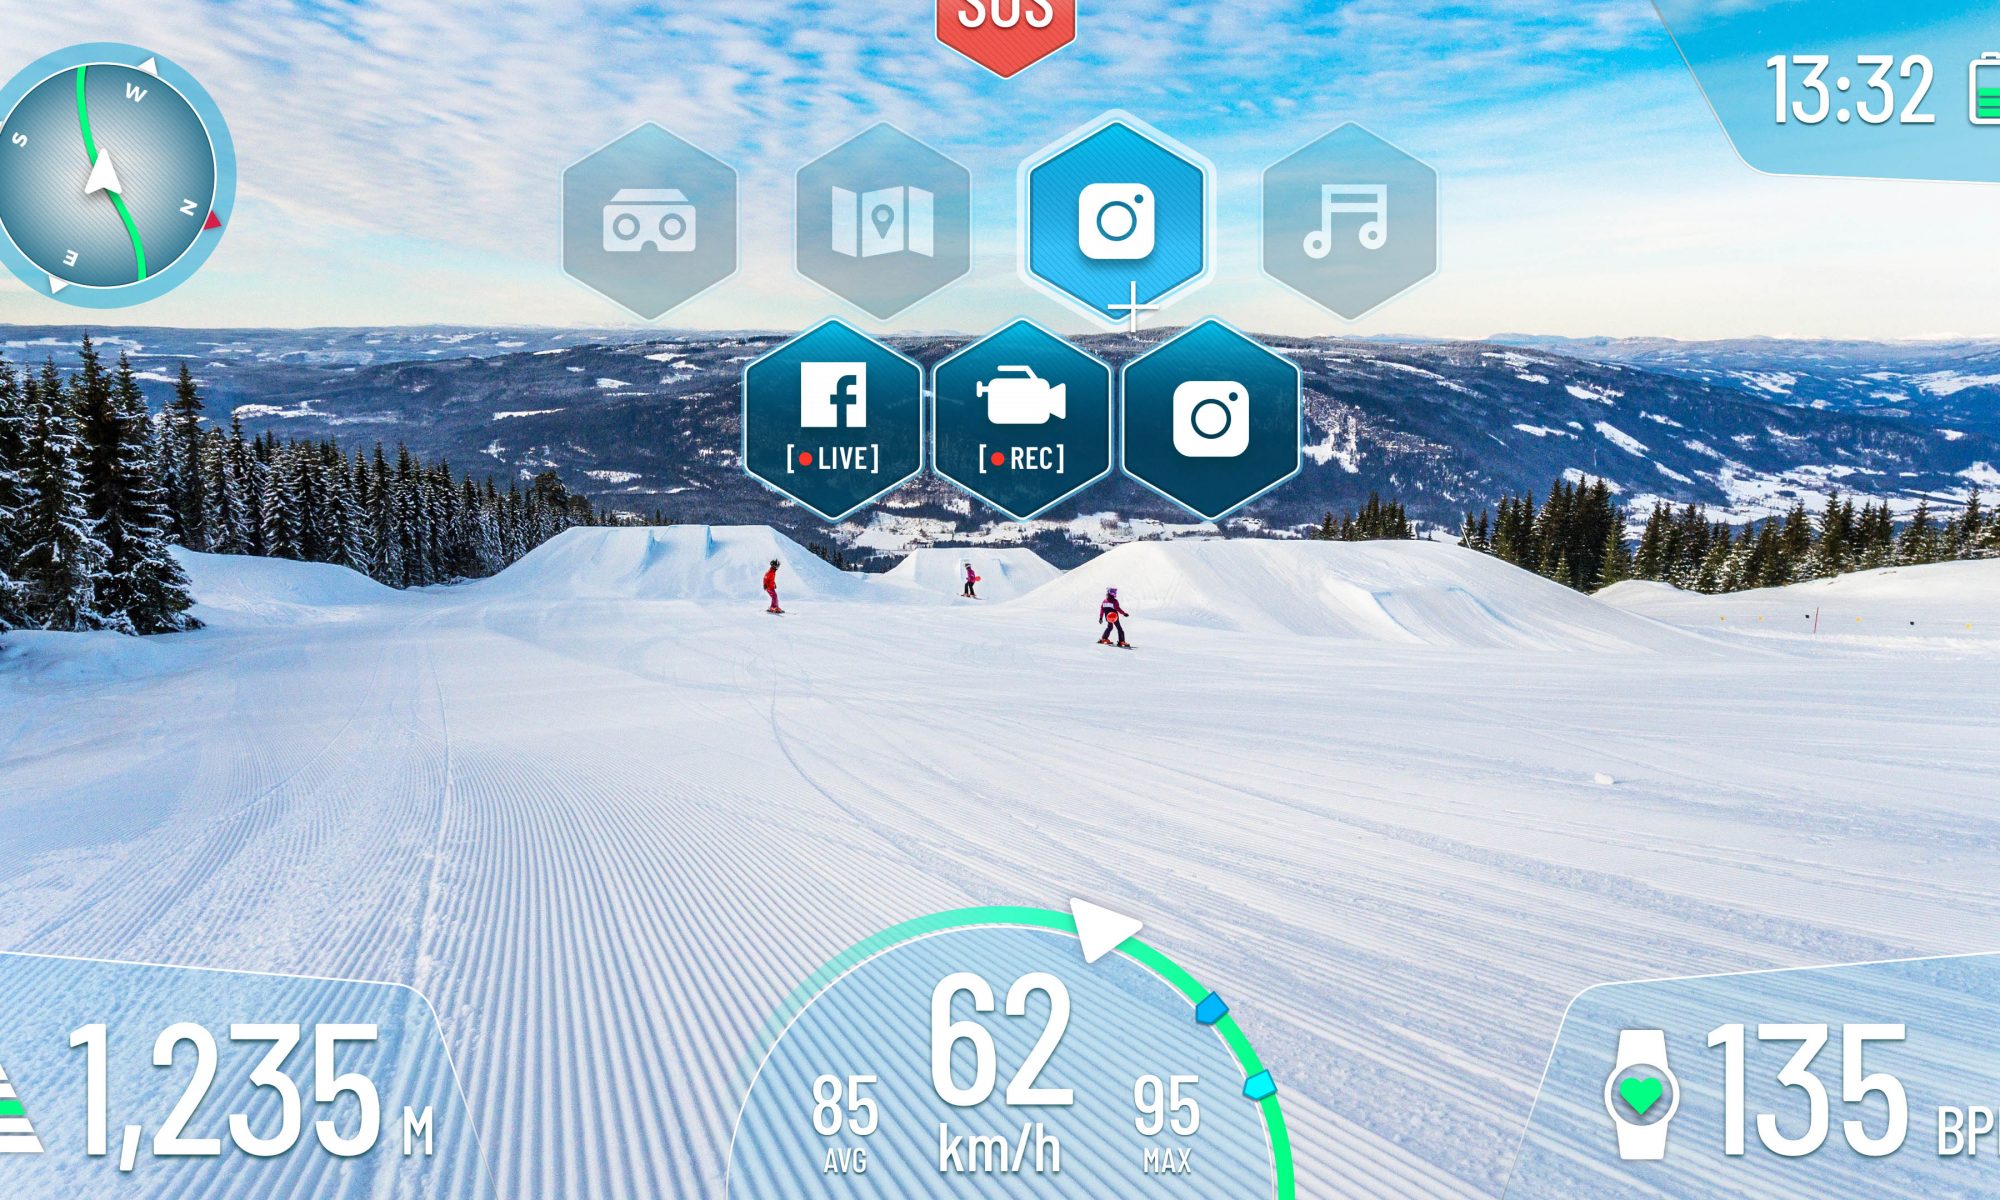 On the visor of the Mohawk helmet, the user can call up various visual data such as speed, altitude and a navigation system. A glance into the future: First ski and snowboard helmet with Augmented Reality is being tested in Schladming-Dachstein.